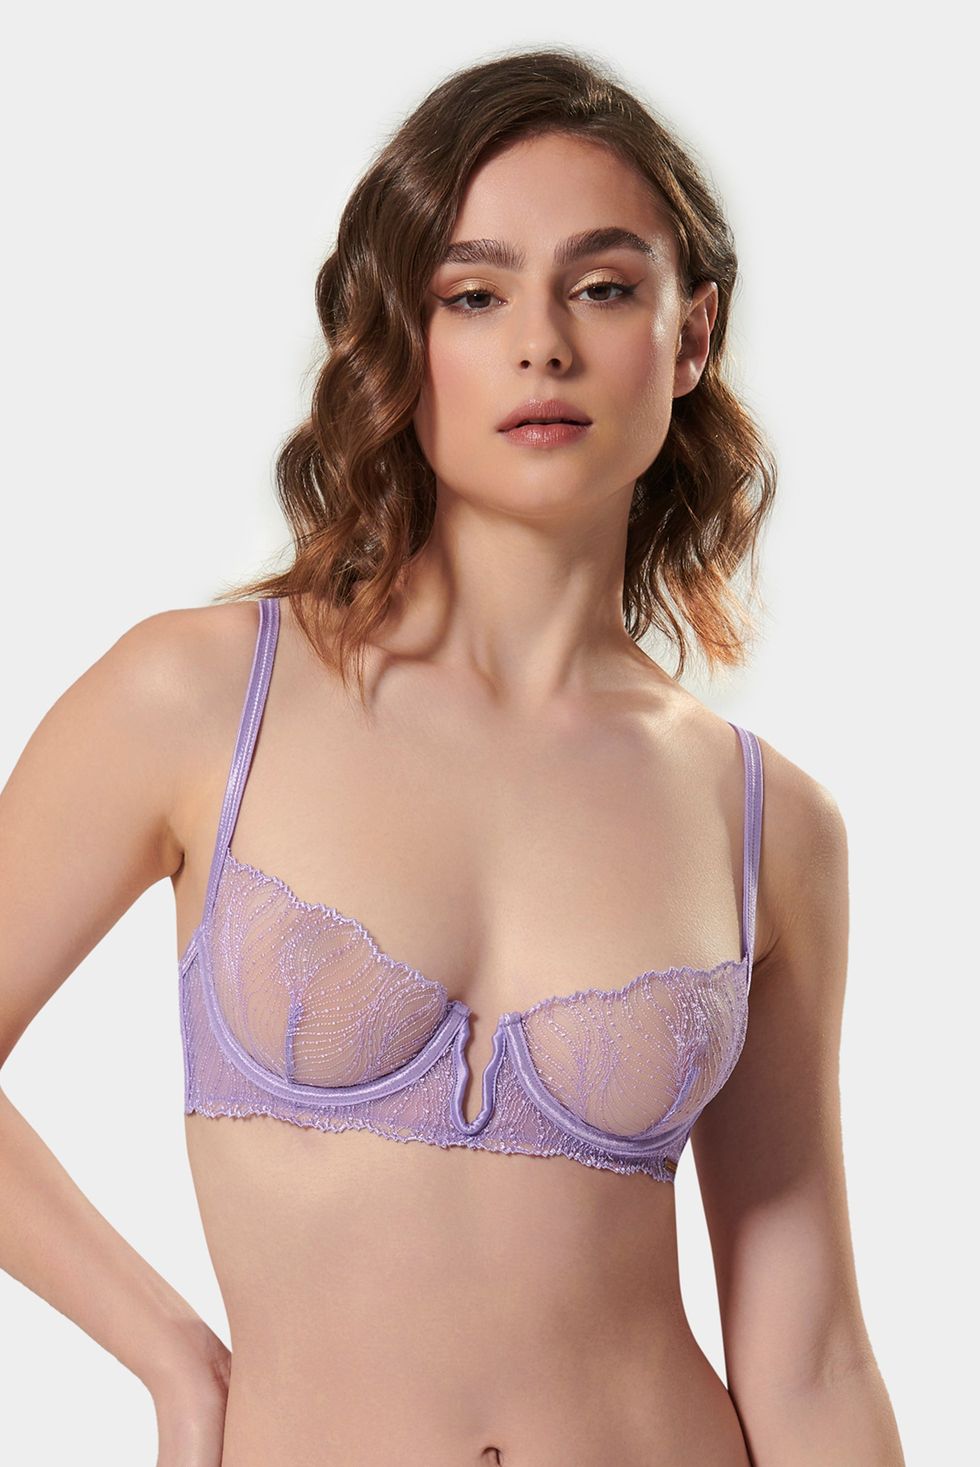 I have lopsided yitties - most bras leave a gap on one side but I found a  style that hugs both boobs perfectly